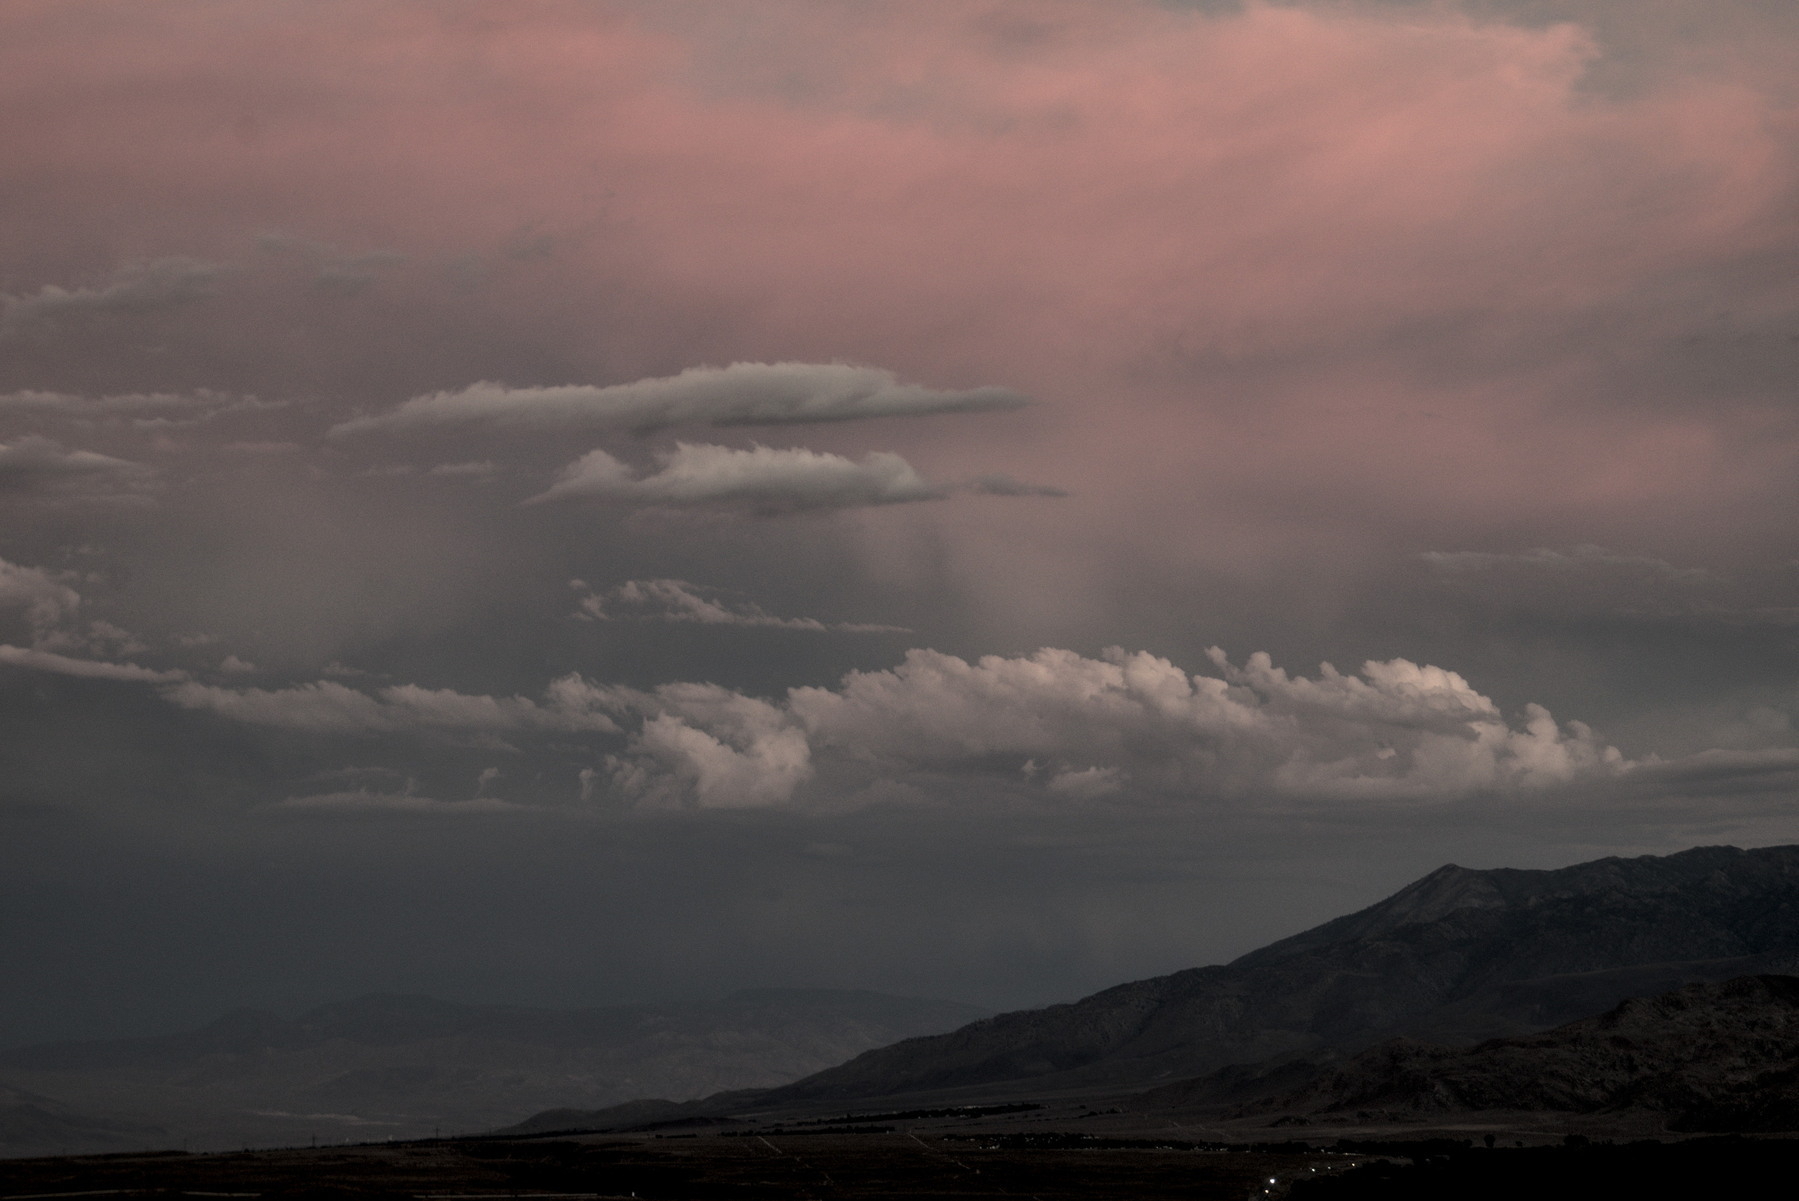 A narrow line of foft grey clouds float over the trailing edge of a mountain range, with pink skies behind.